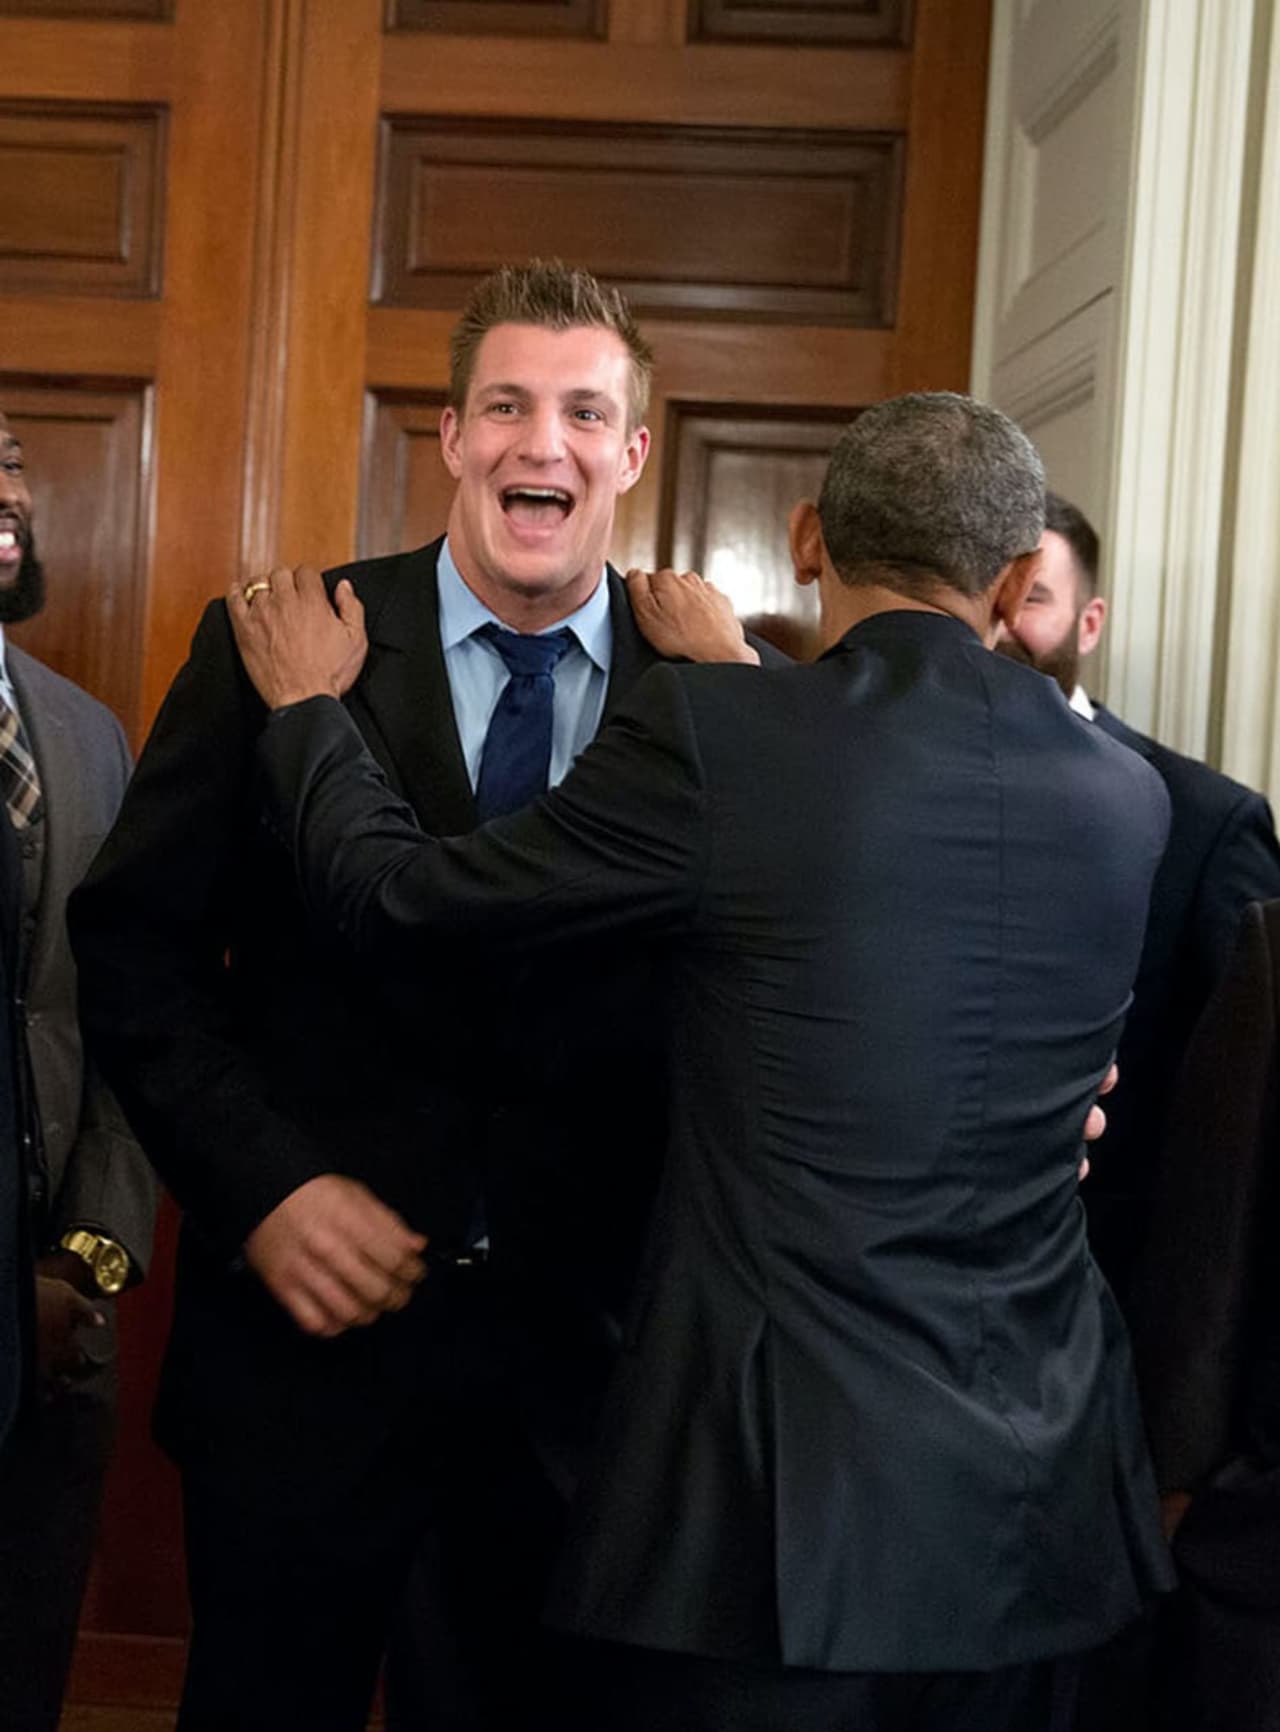 Rob Gronkowski celebrates the Patriots' Super Bowl XLIX win in 2015 with then US President Barack Obama at the White House. You can celebrate 'Gronks' retirement from the NFL with him next month.